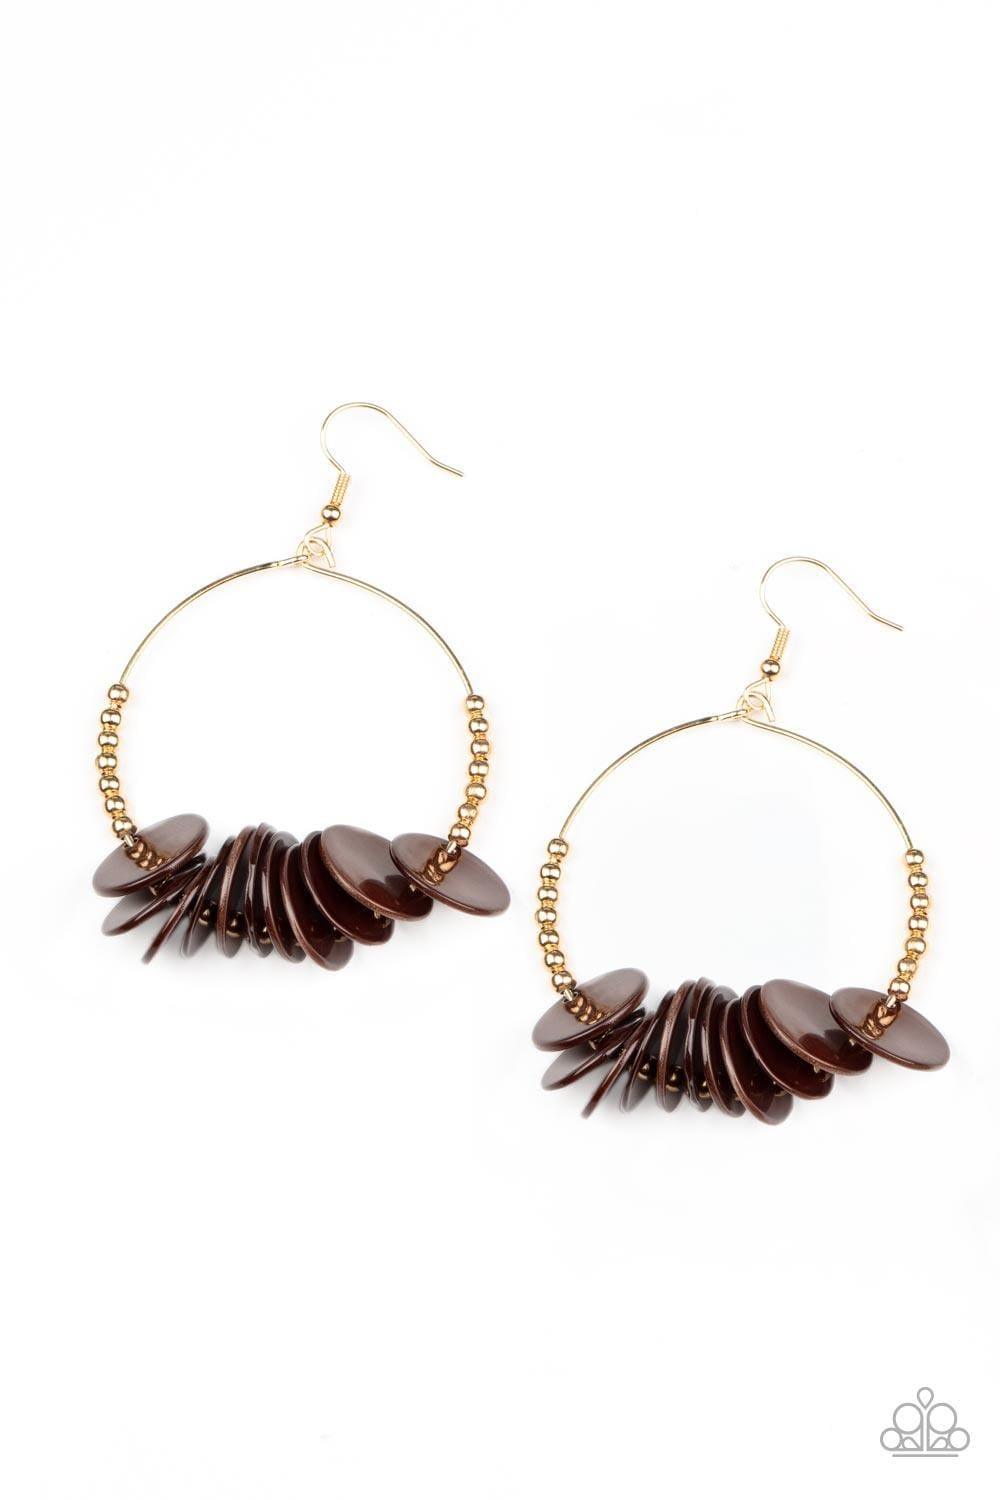 Paparazzi Accessories - Caribbean Cocktail - Brown Earrings - Bling by JessieK